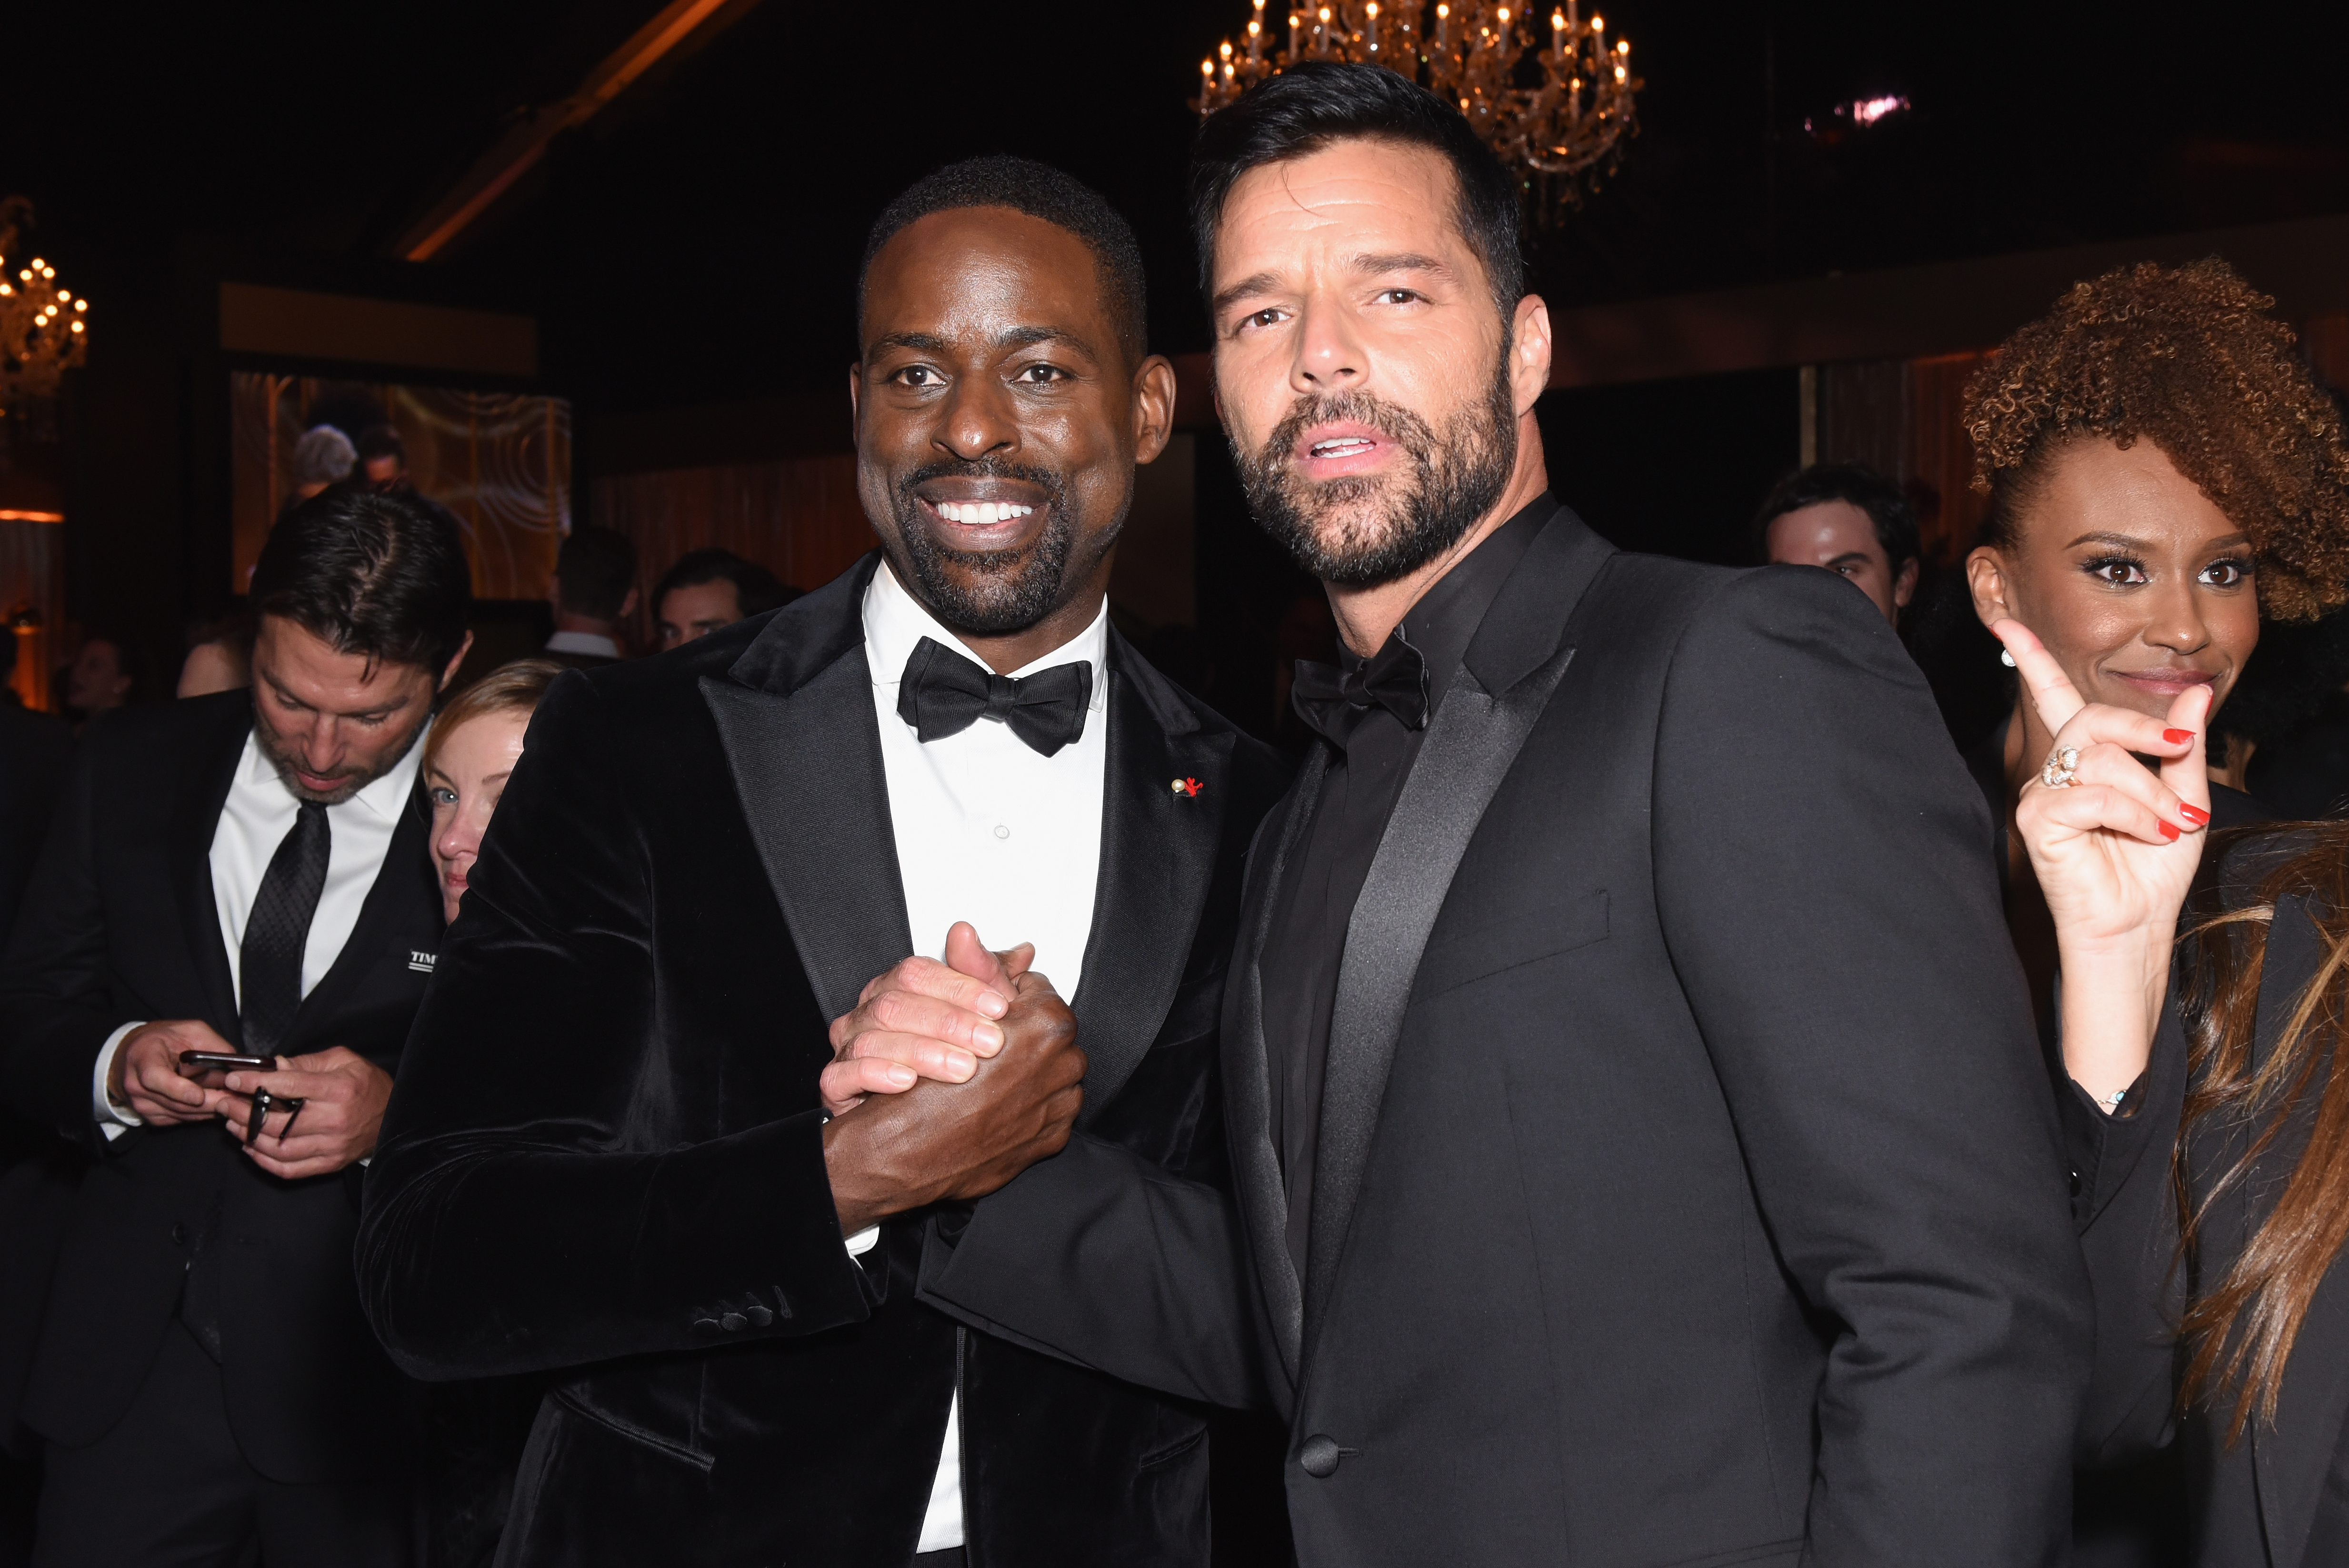 Sterling J. Brown and Ricky Martin